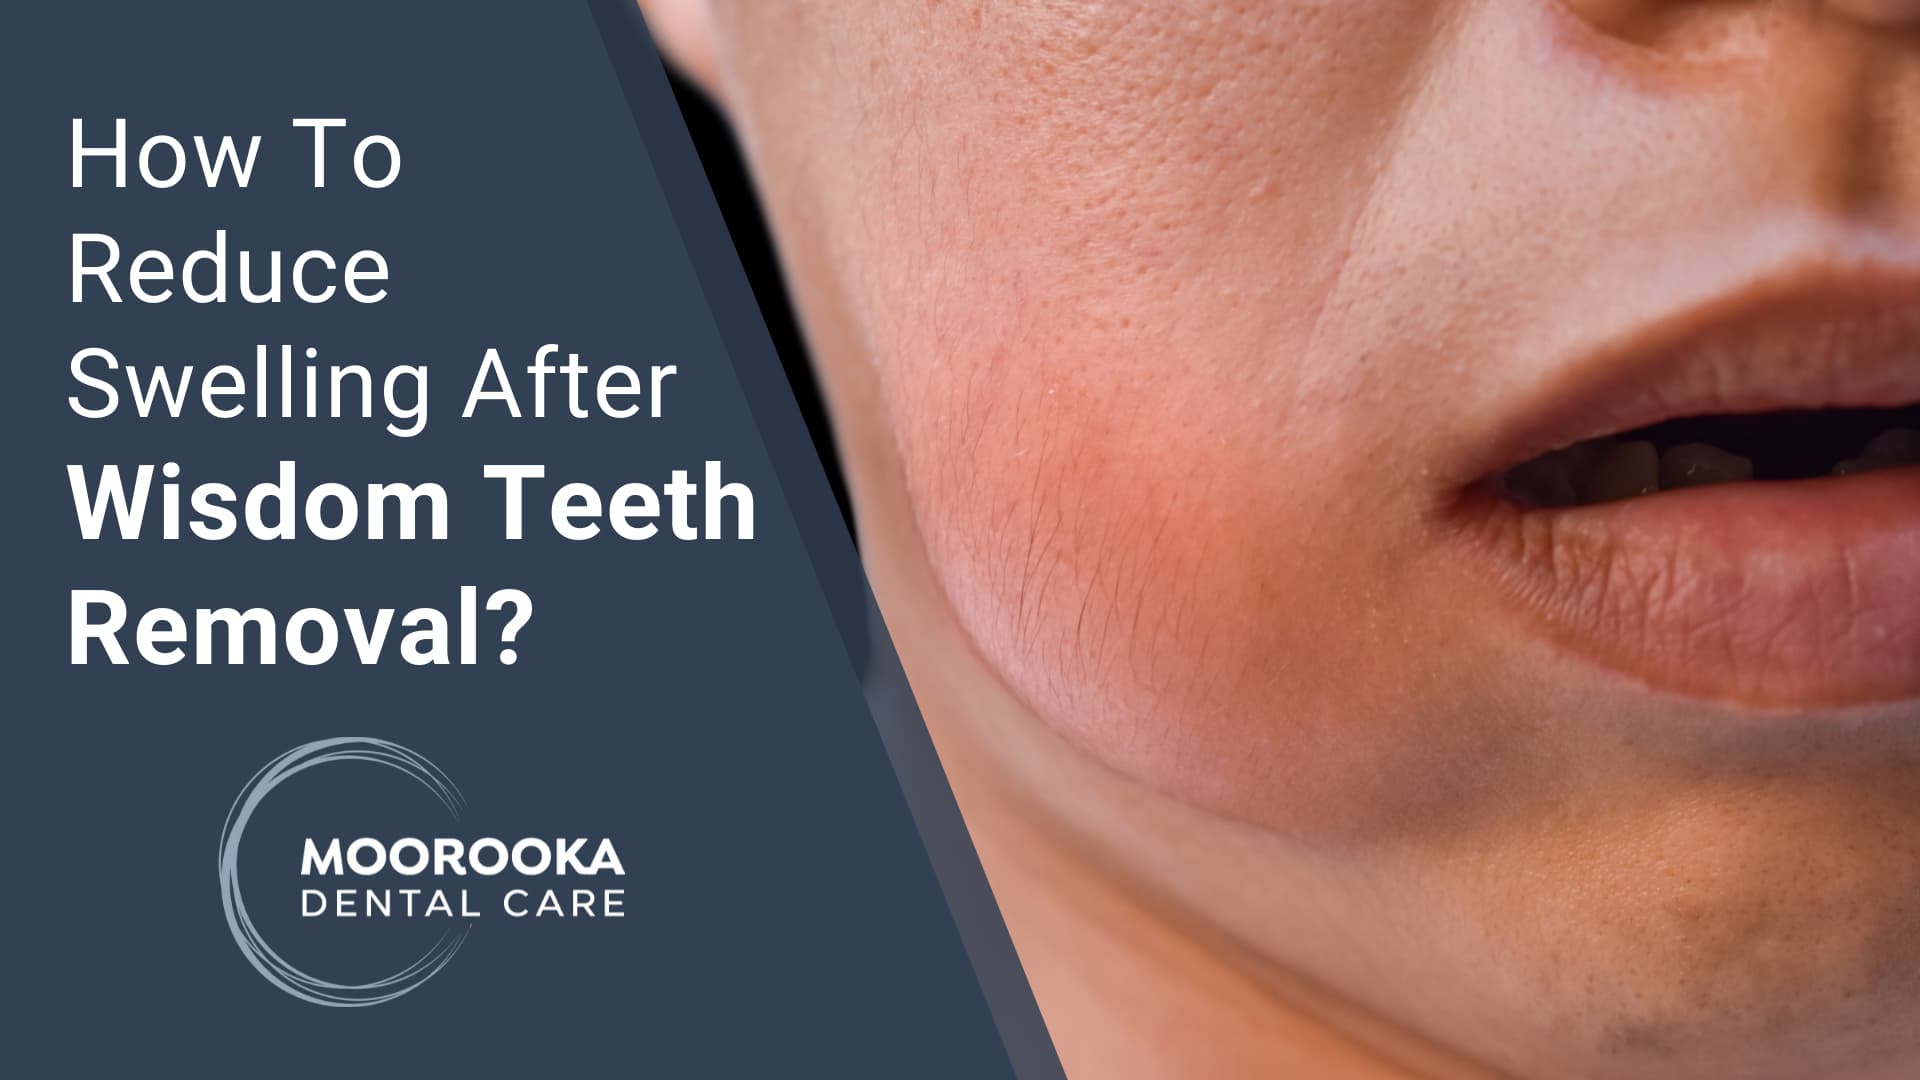 How To Reduce Swelling After Wisdom Teeth Removal?